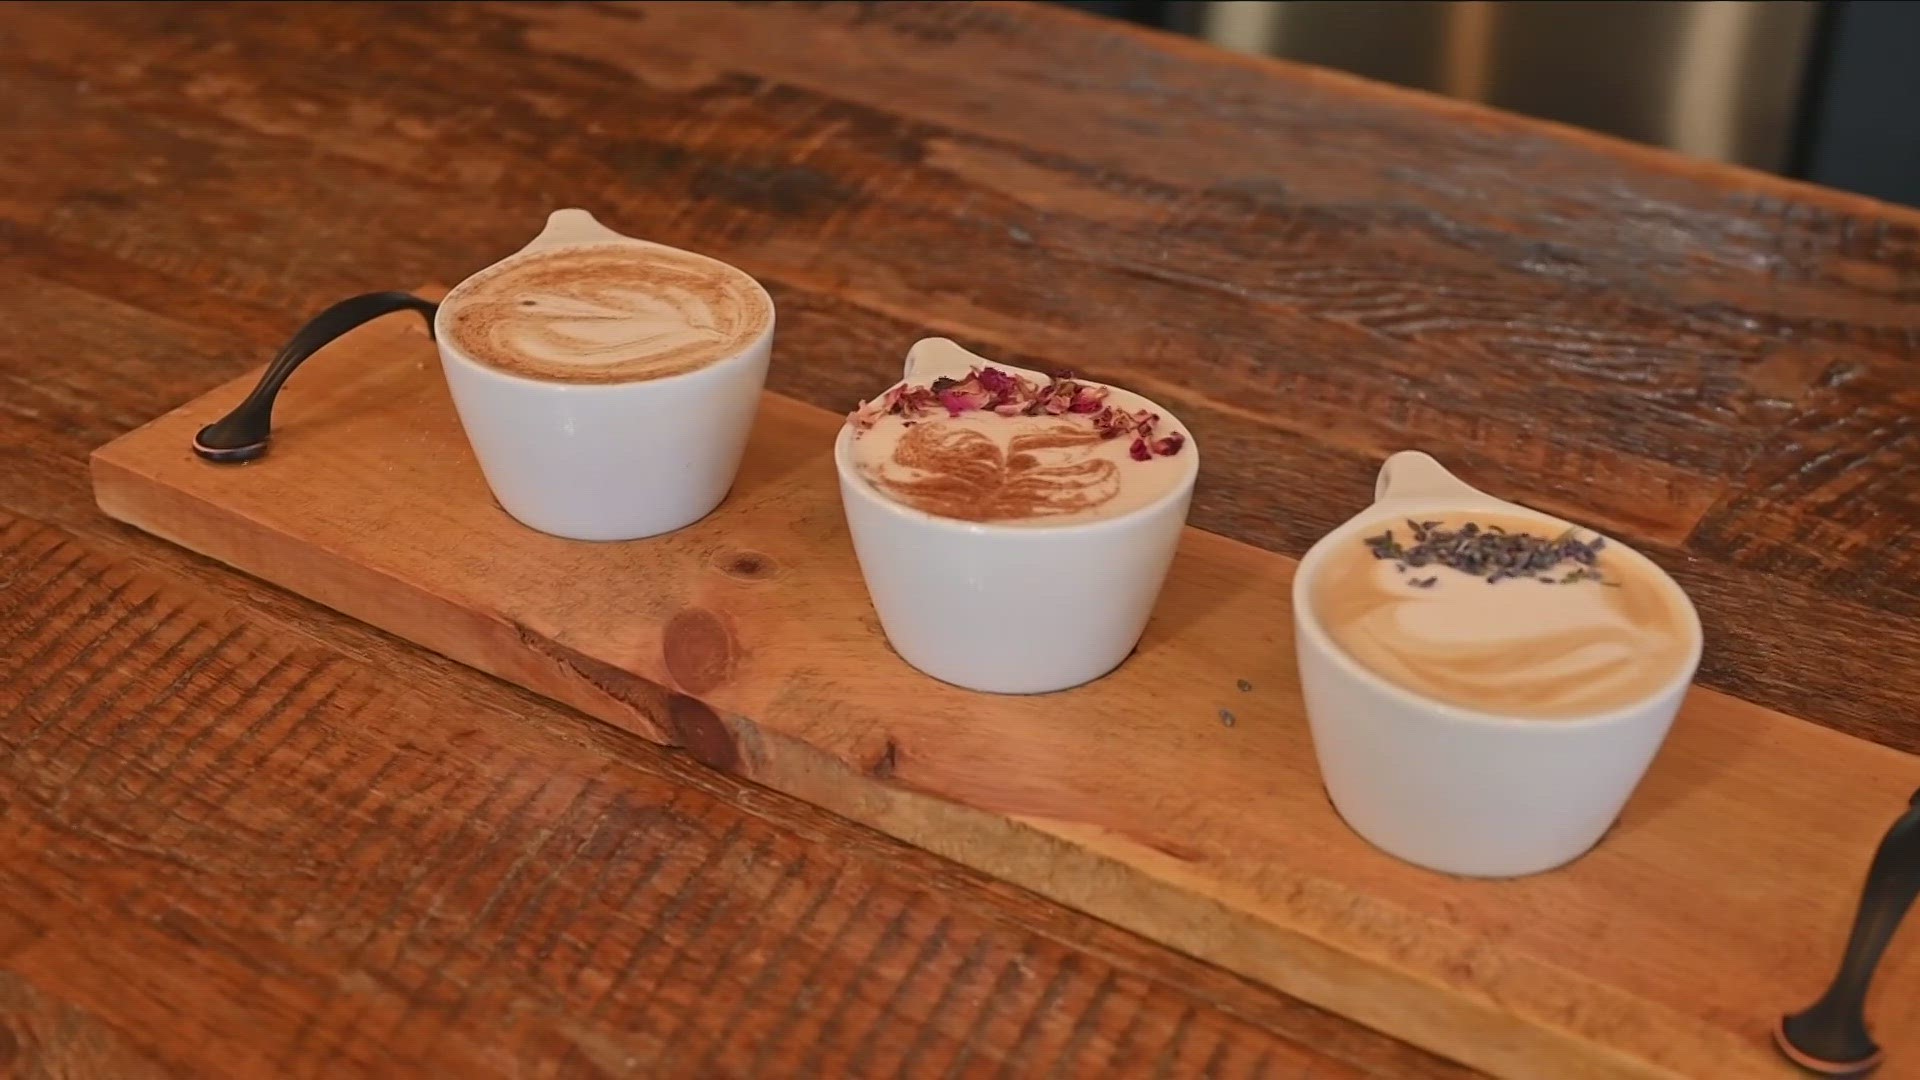 Daybreak's Lauren Hall visited Craft Coffee House, Patina 250 and Cafe GODOT.